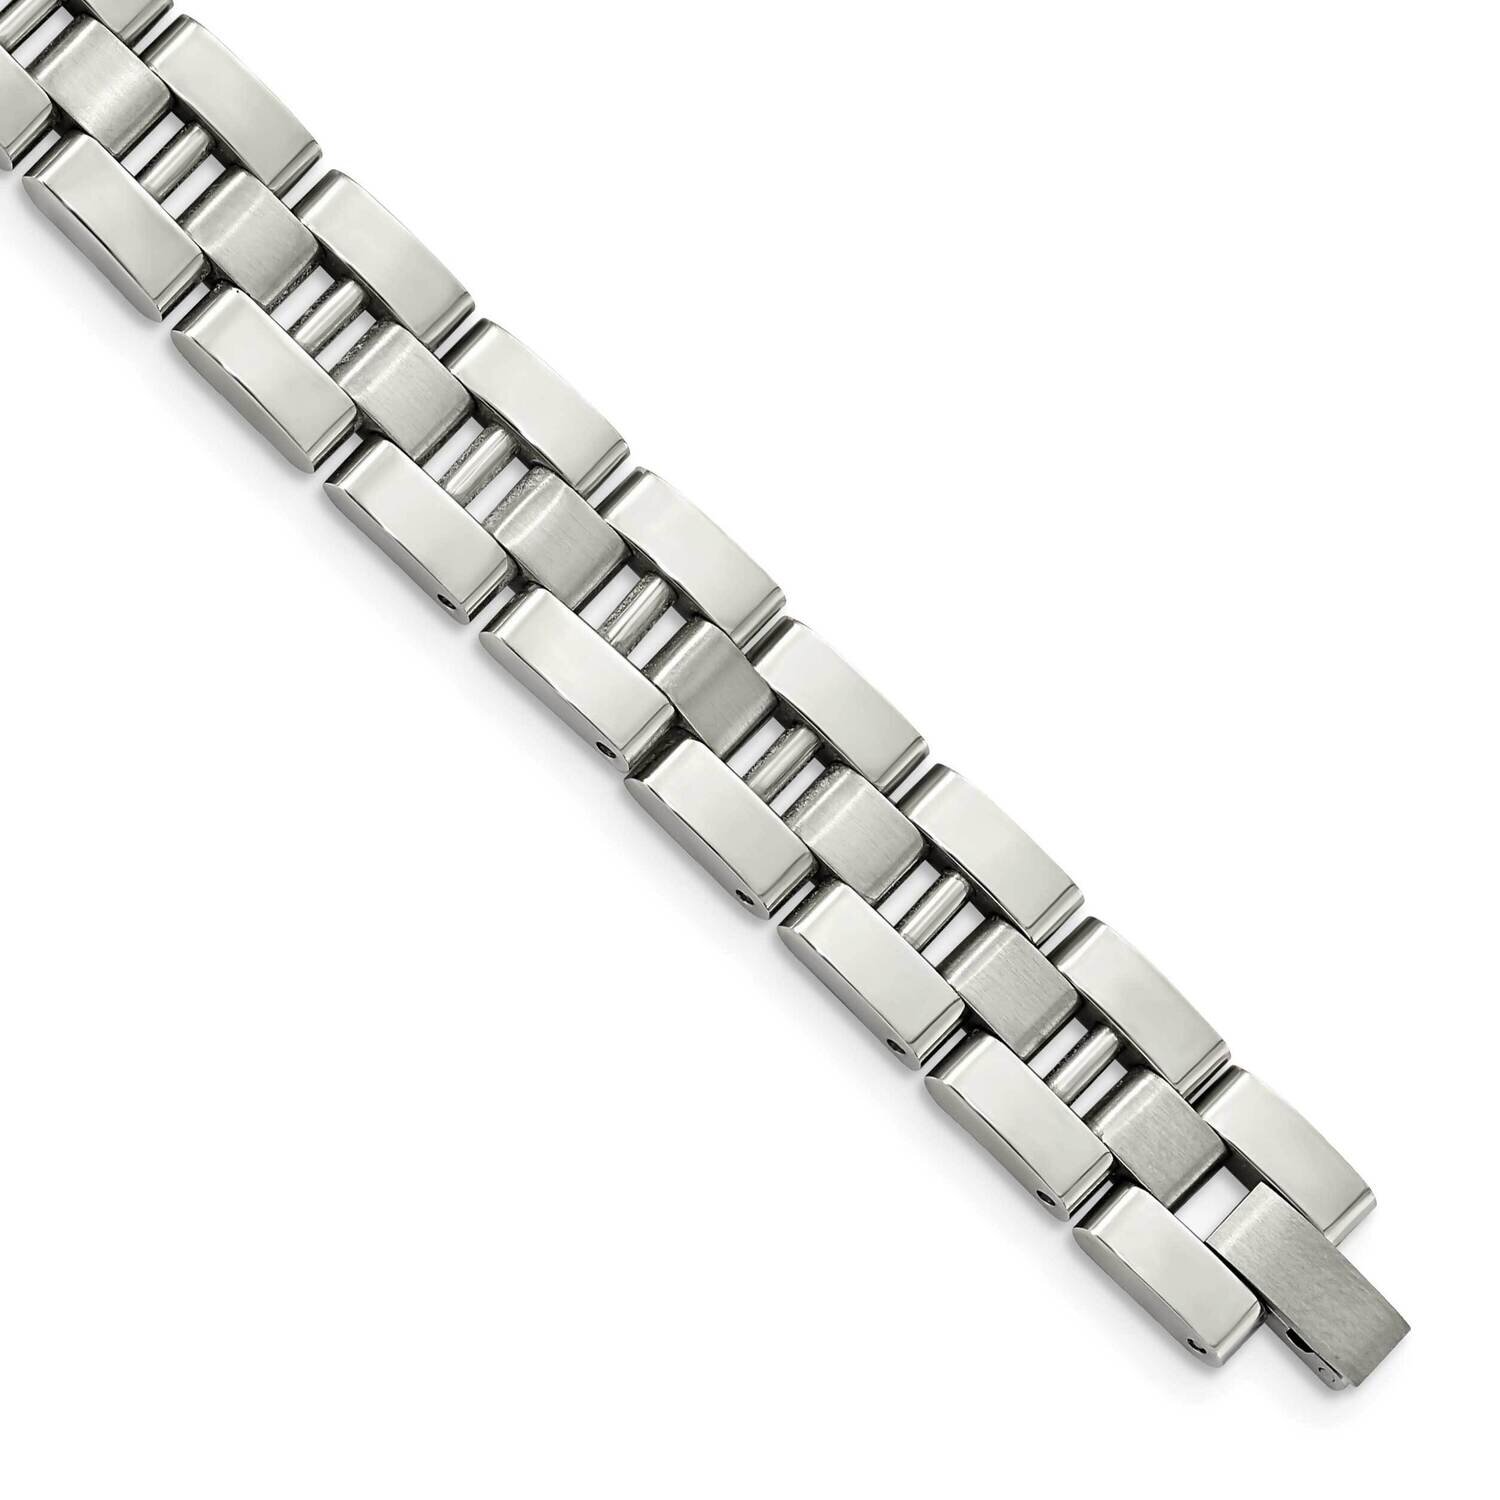 8.25 Inch Bracelet Stainless Steel Brushed and Polished SRB520-8.5